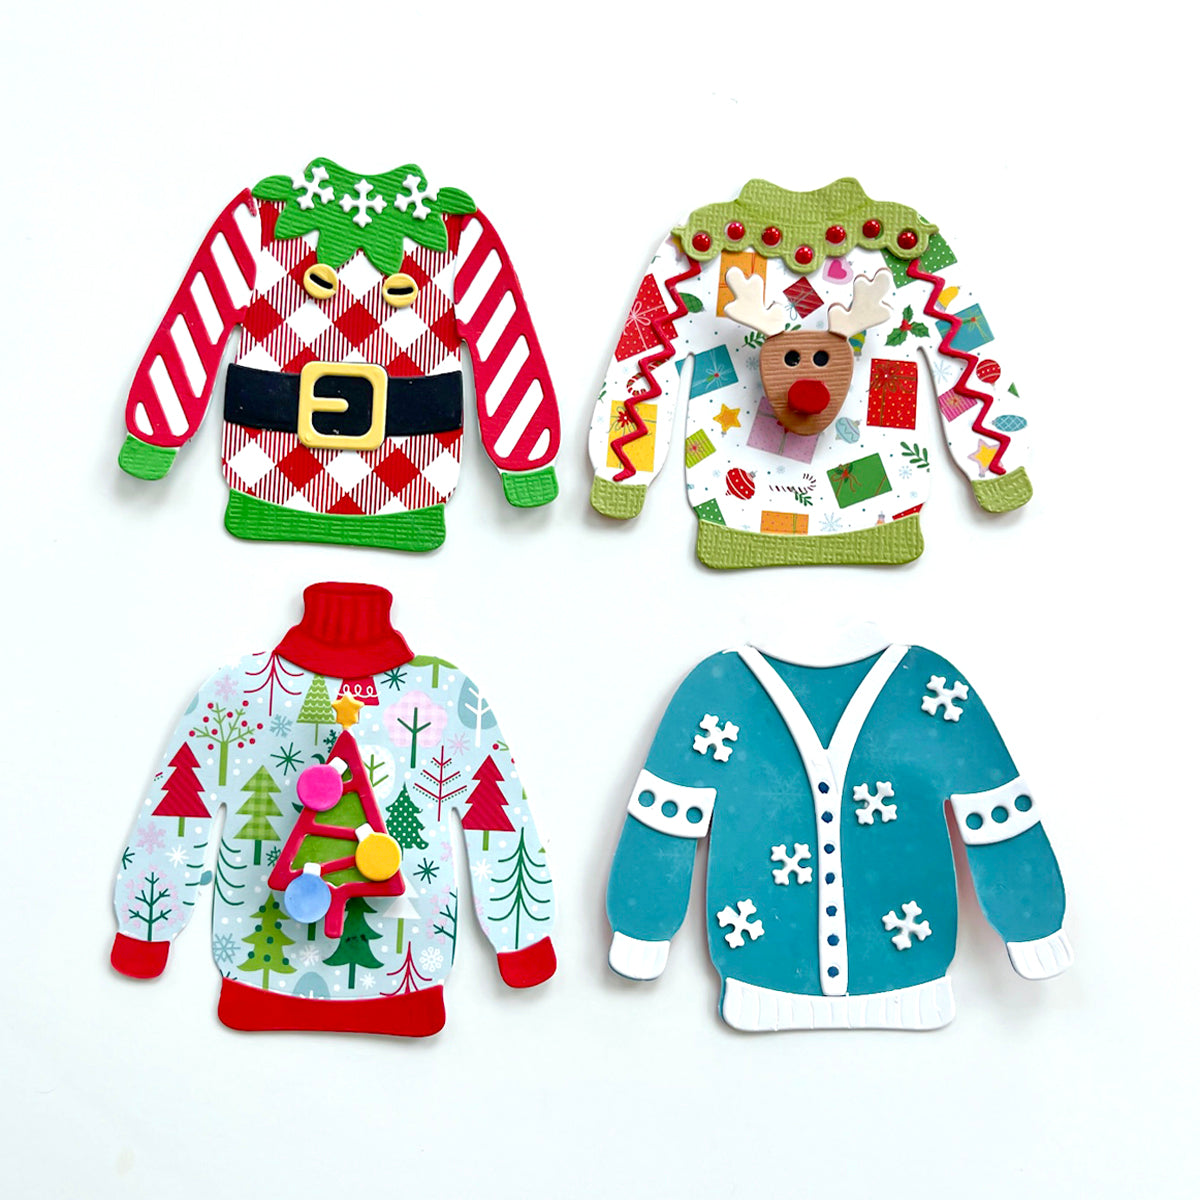 Ugly Sweater Die Set sold out